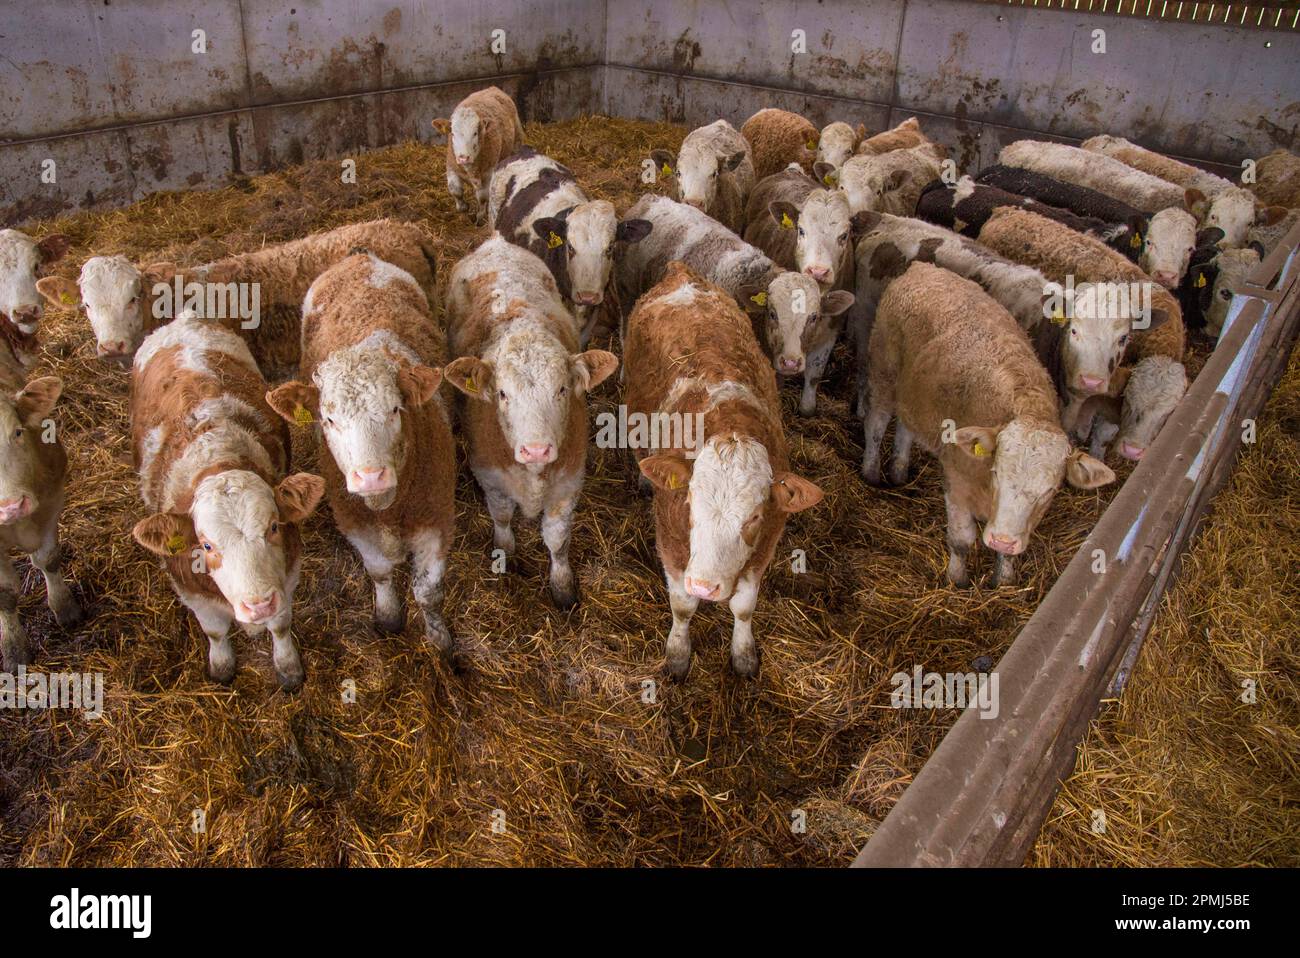 Domestic Cattle, Simmental herd, standing in straw yard, Yorkshire, England, United Kingdom Stock Photo